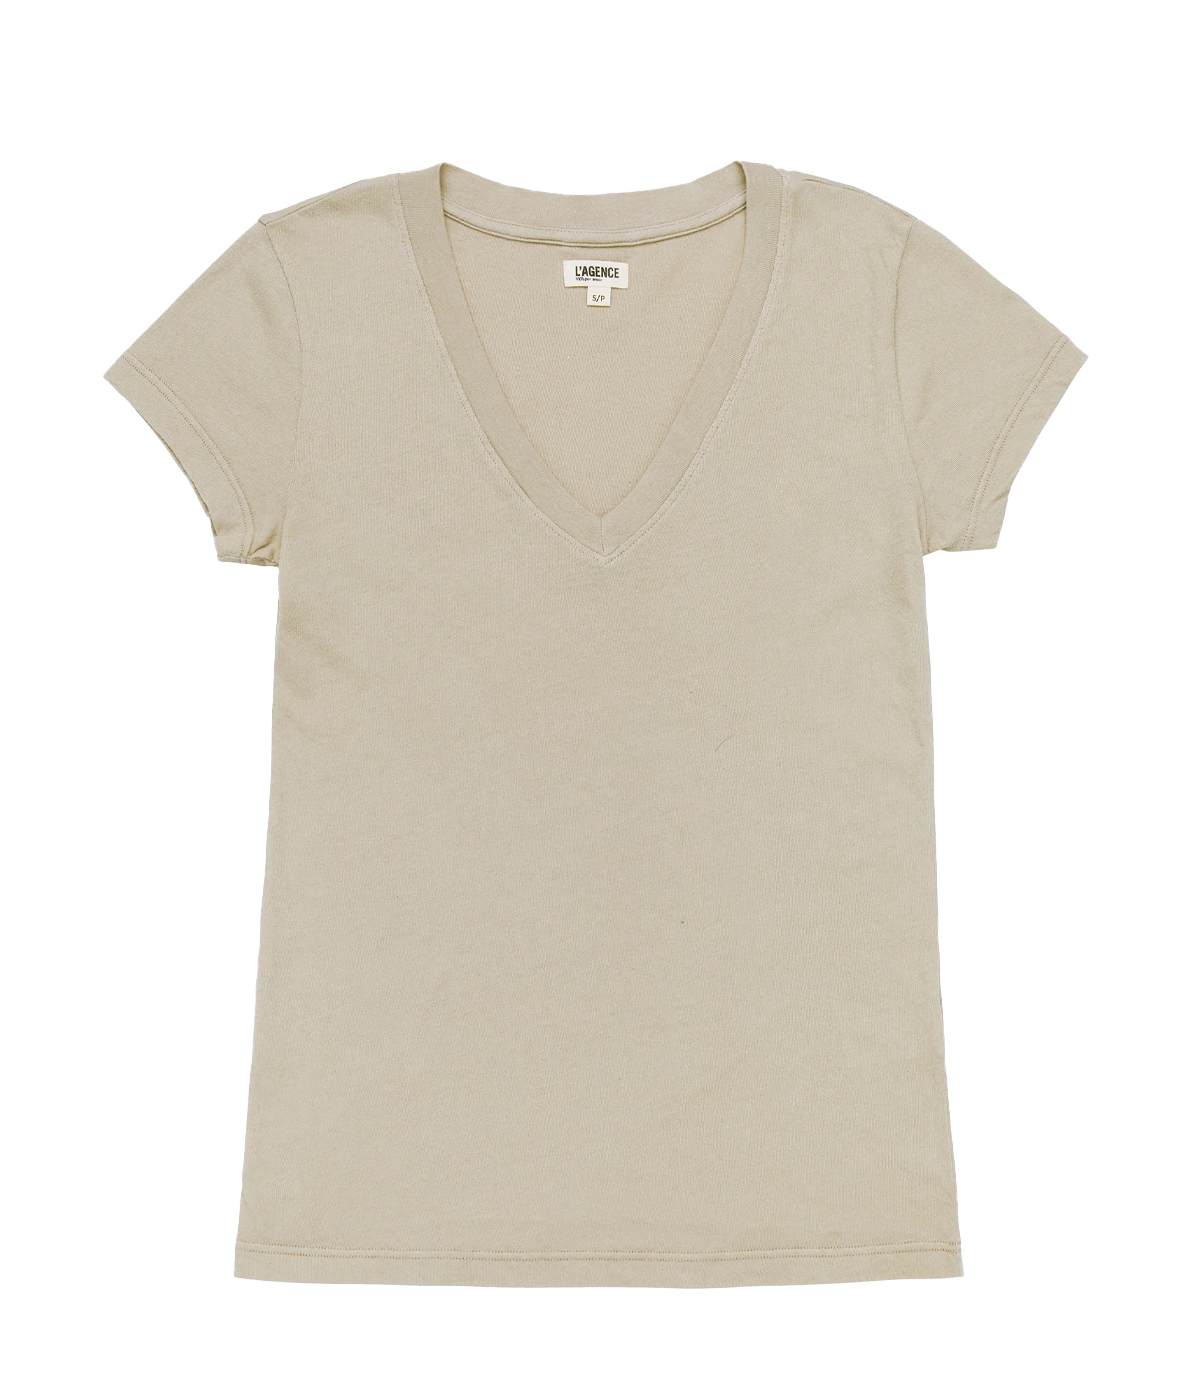 A classic basic neutral cotton t-shirt, with a V neckline, short sleeve and relaxed fit. Back to basics, everyday tee, stretchy cotton, throw on and go, 100% cotton, bra friendly, made in usa. 